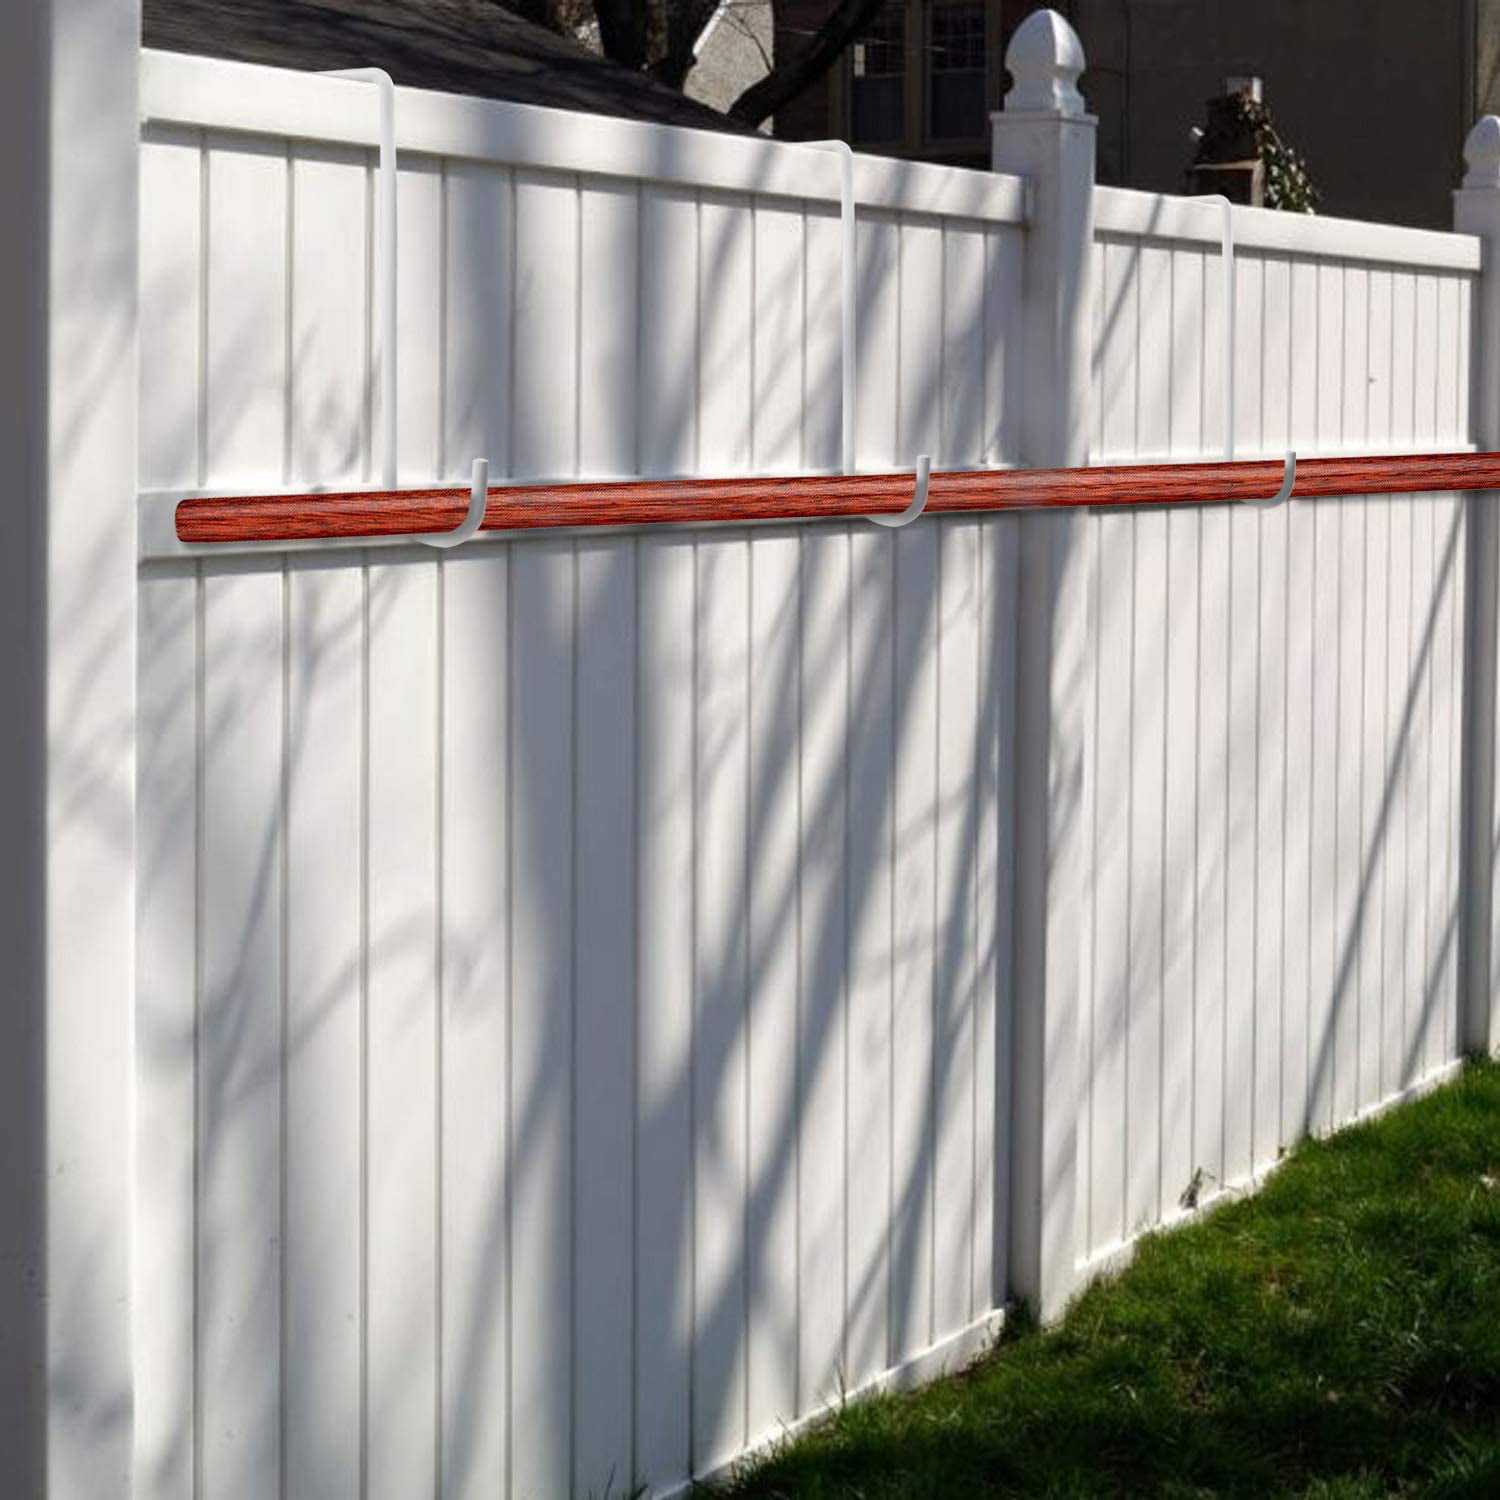 Alumawood Lattice Covers Patio Hooks 3x8in & 2x6in & Pool Equipment 6 Pack White Steel Hangers Awnings Plants & Planters 2x6in Great Brackets for Hanging Over Vinyl Fences Pergolas 